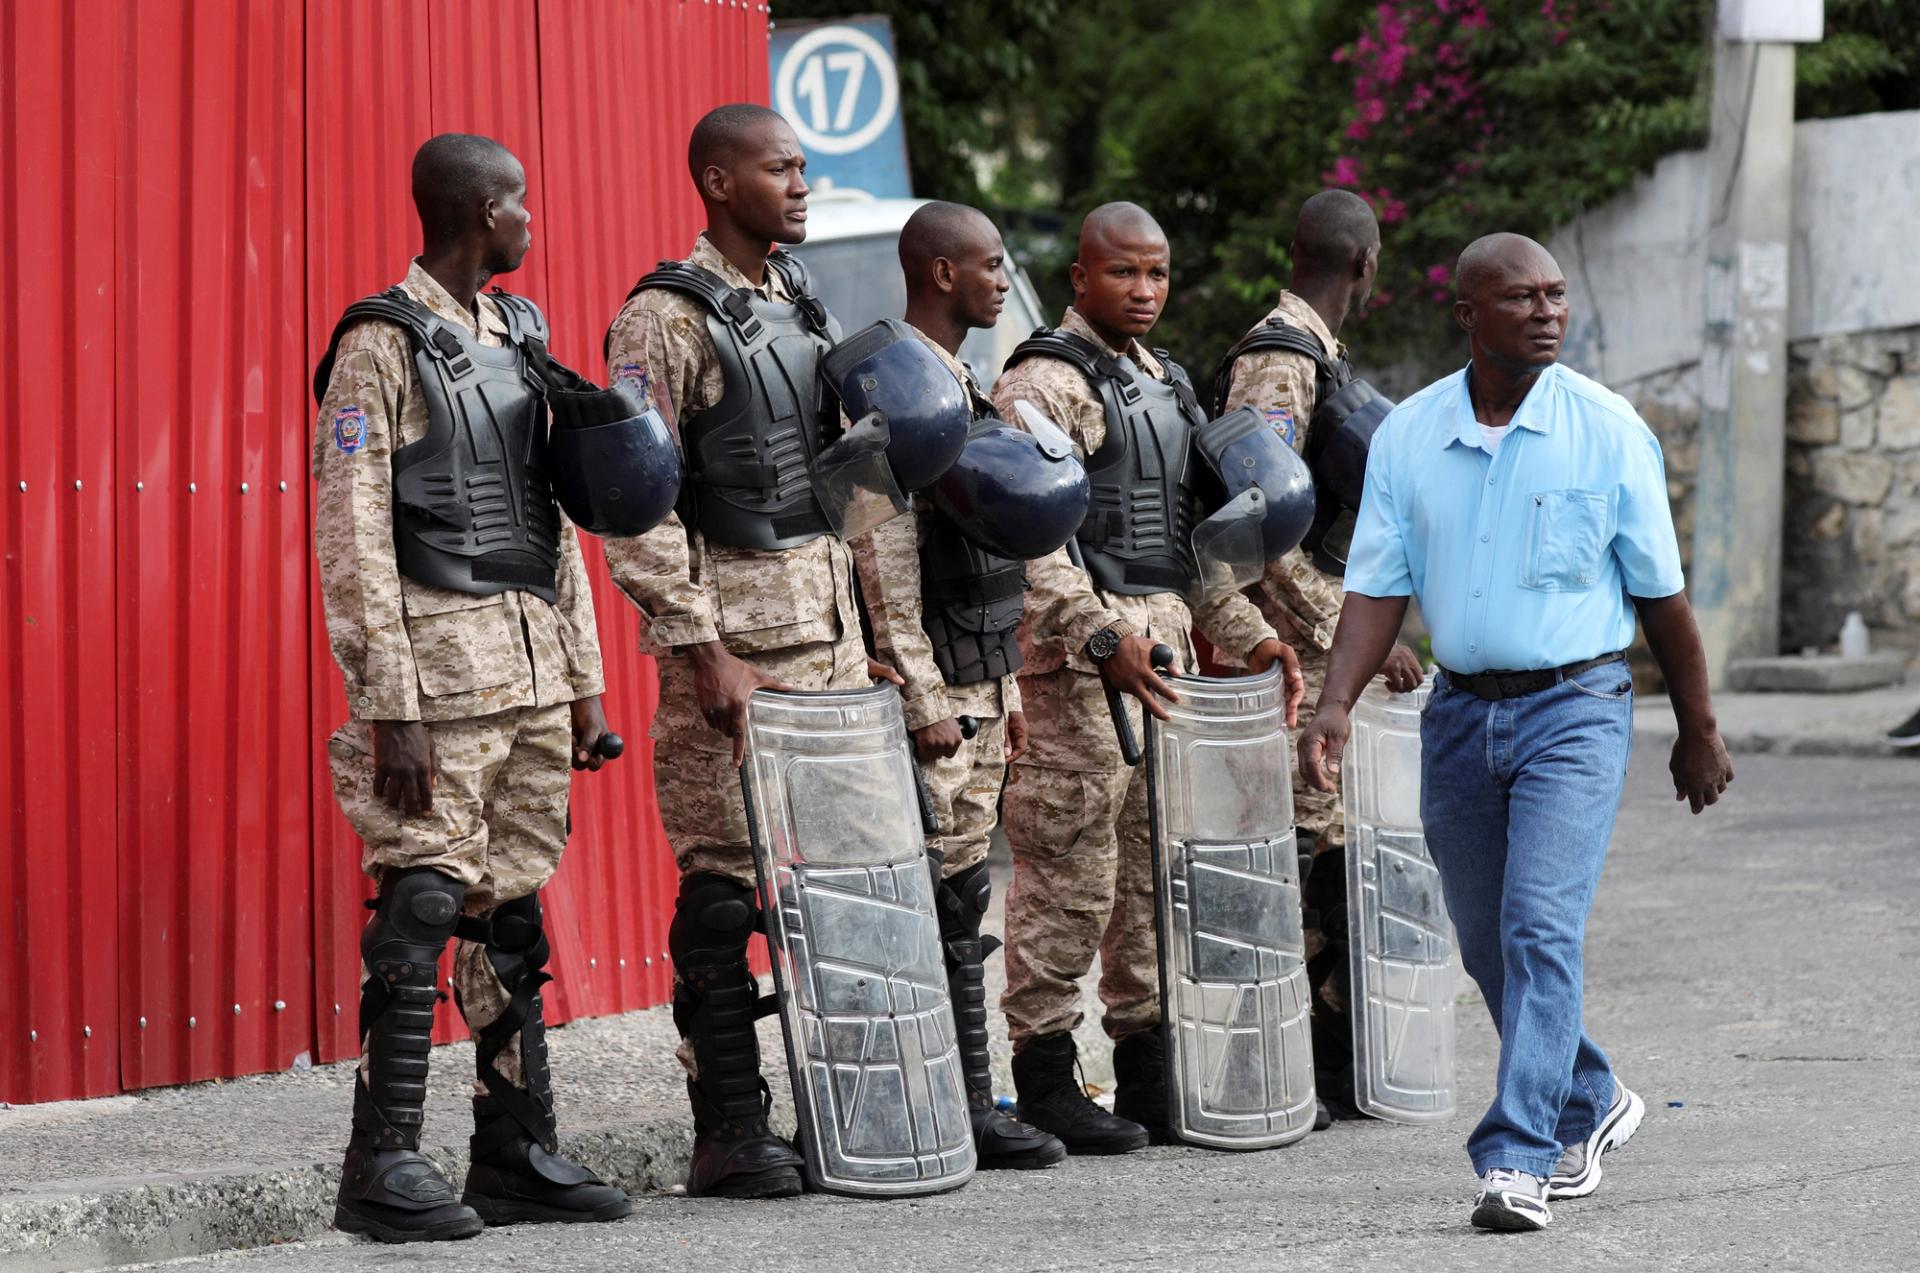 Police officers stand guard before a Ceremony to install Transition Council, on the outskirts of Port-au-Prince, Haiti.  